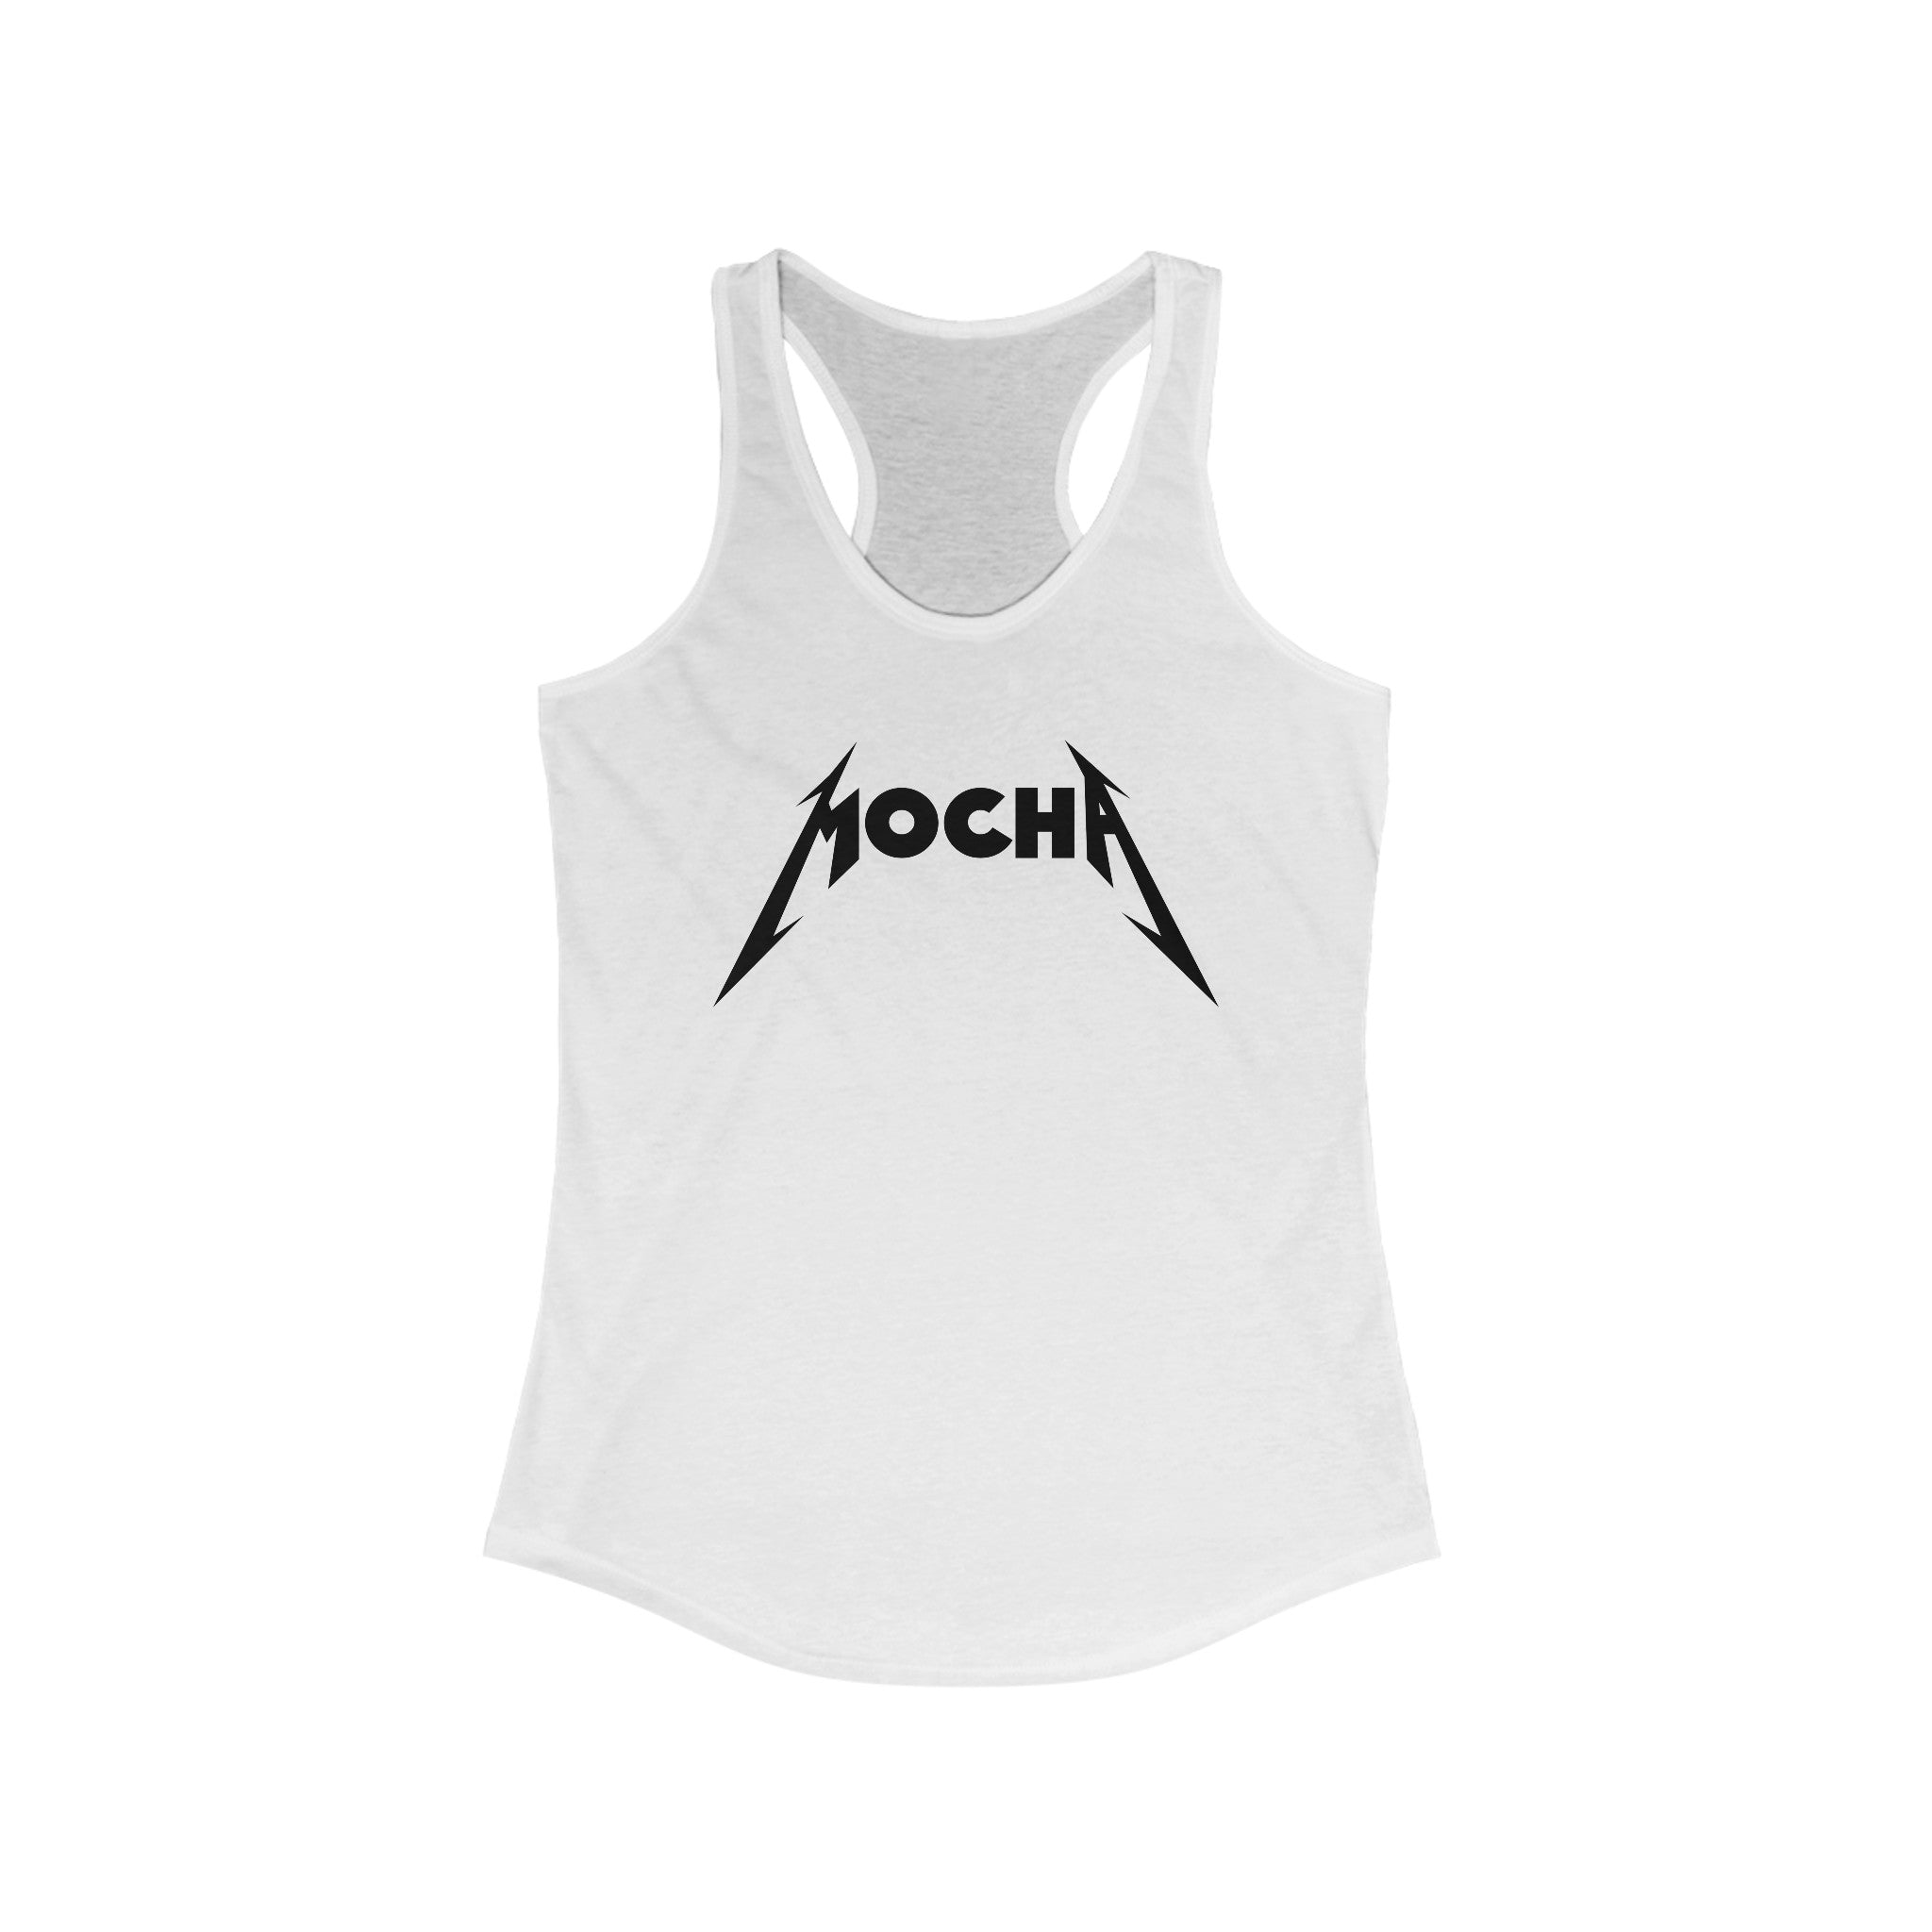 Mocha - Women's Racerback Tank with the word "MOCHA" printed in bold, black letters on the front in a stylized font, perfect for active living.